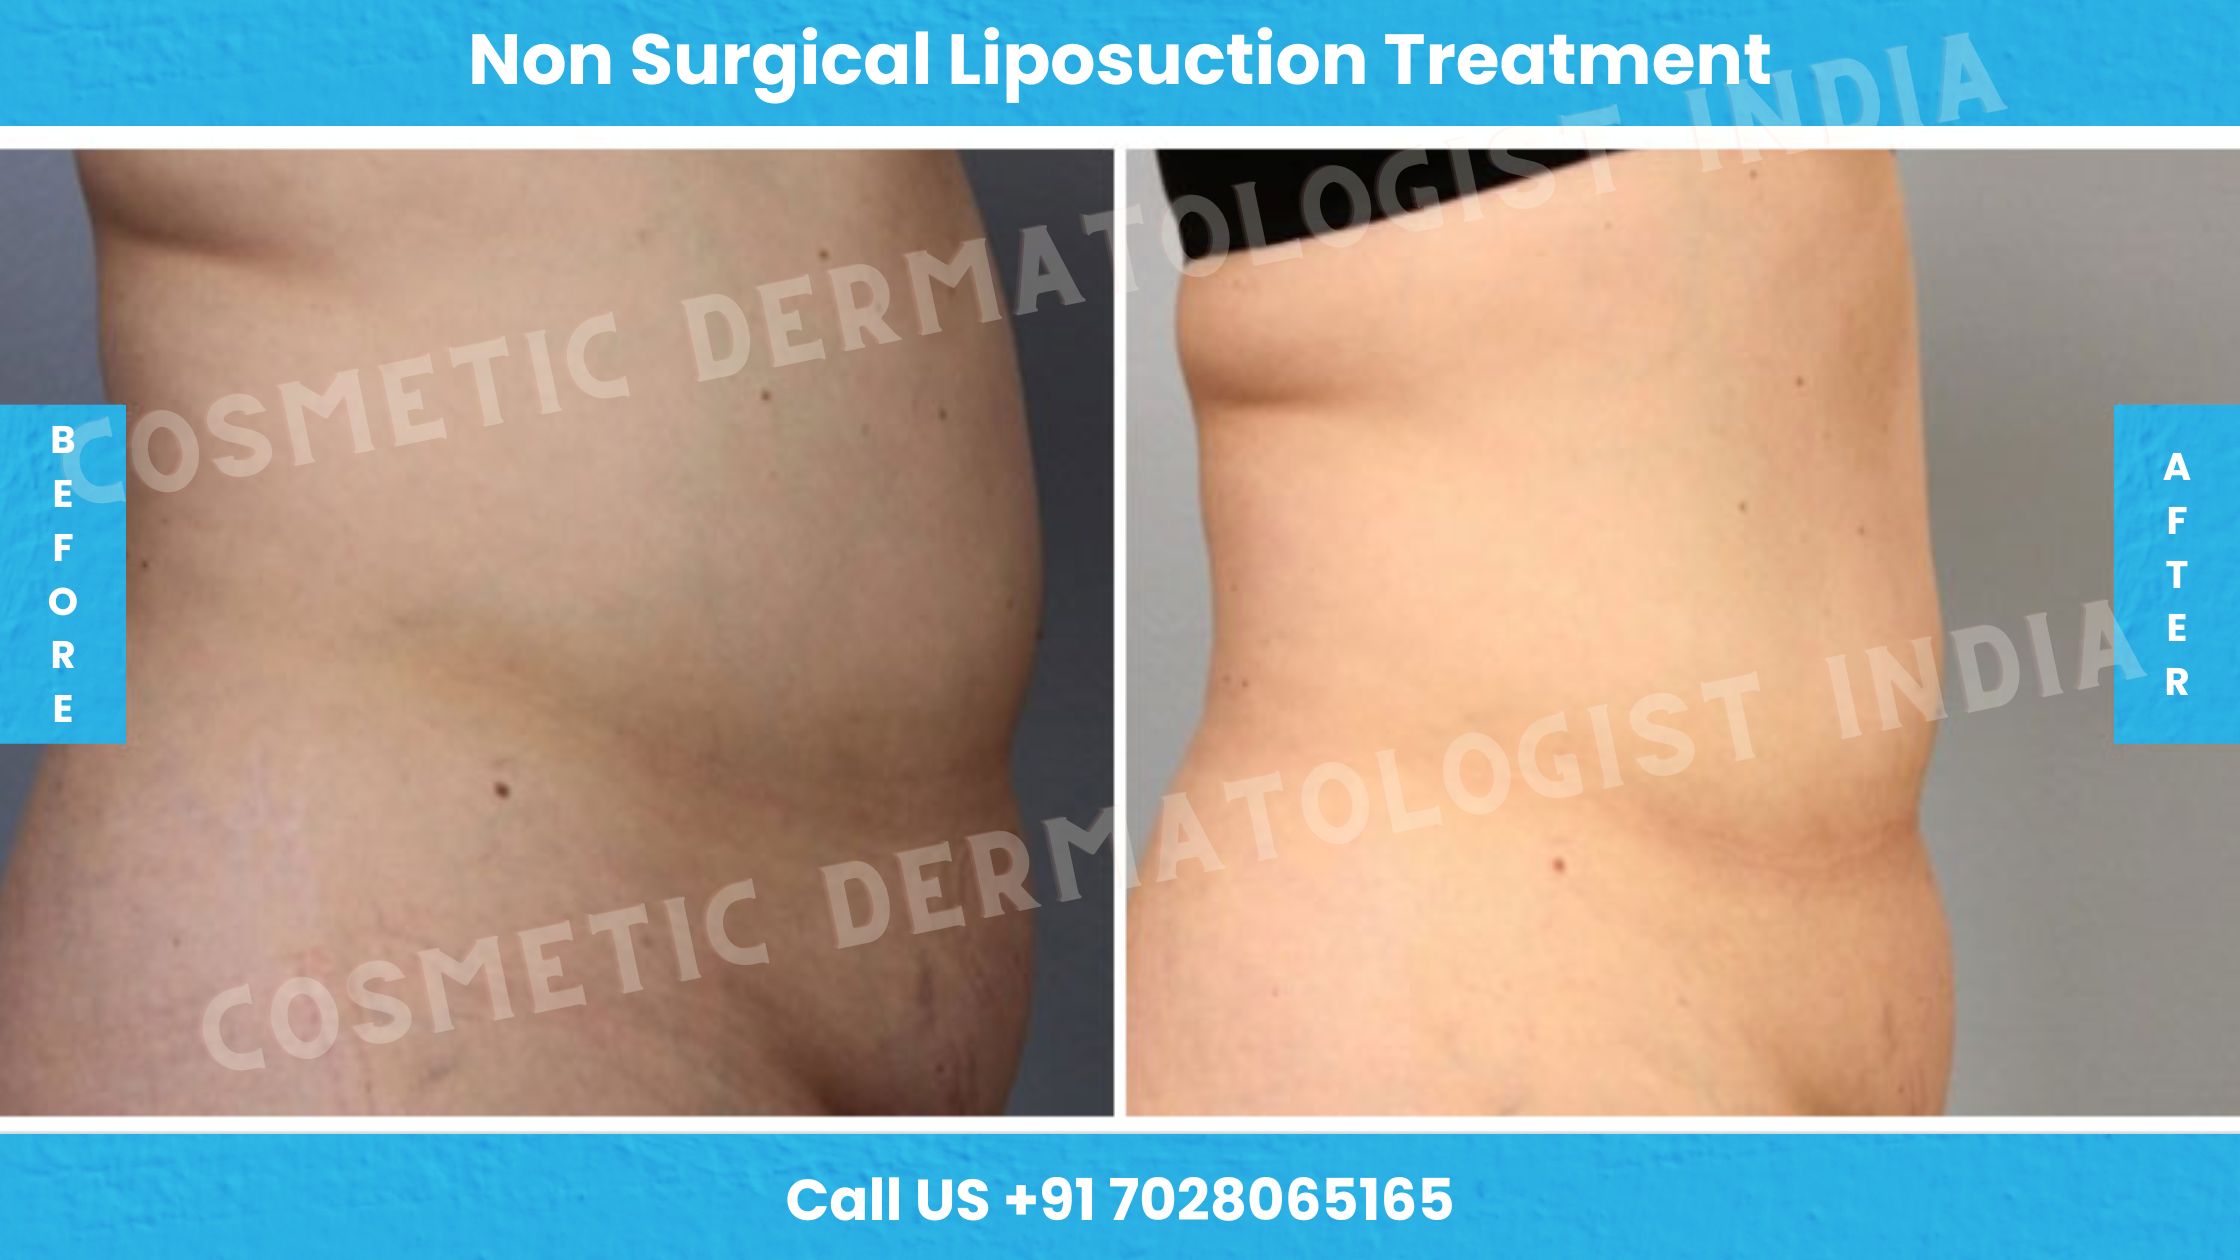 Before and After Images of Non surgical Liposuction Treatment